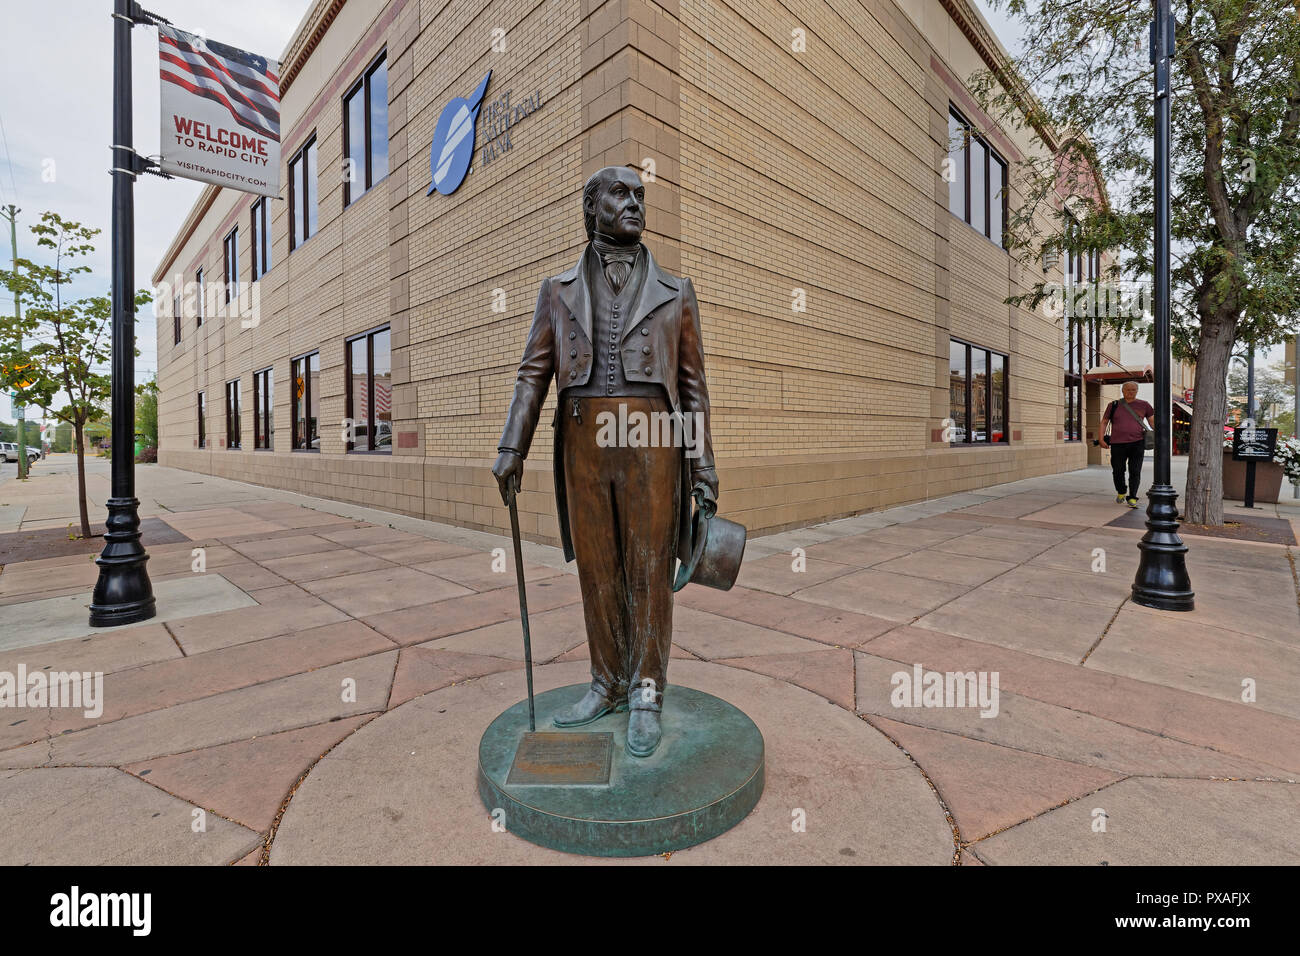 RAPID CITY, SOUTH DAKOTA, September 11, 2018 : The City of Presidents is a series of life-size bronze statues of past presidents along Rapid City stre Stock Photo